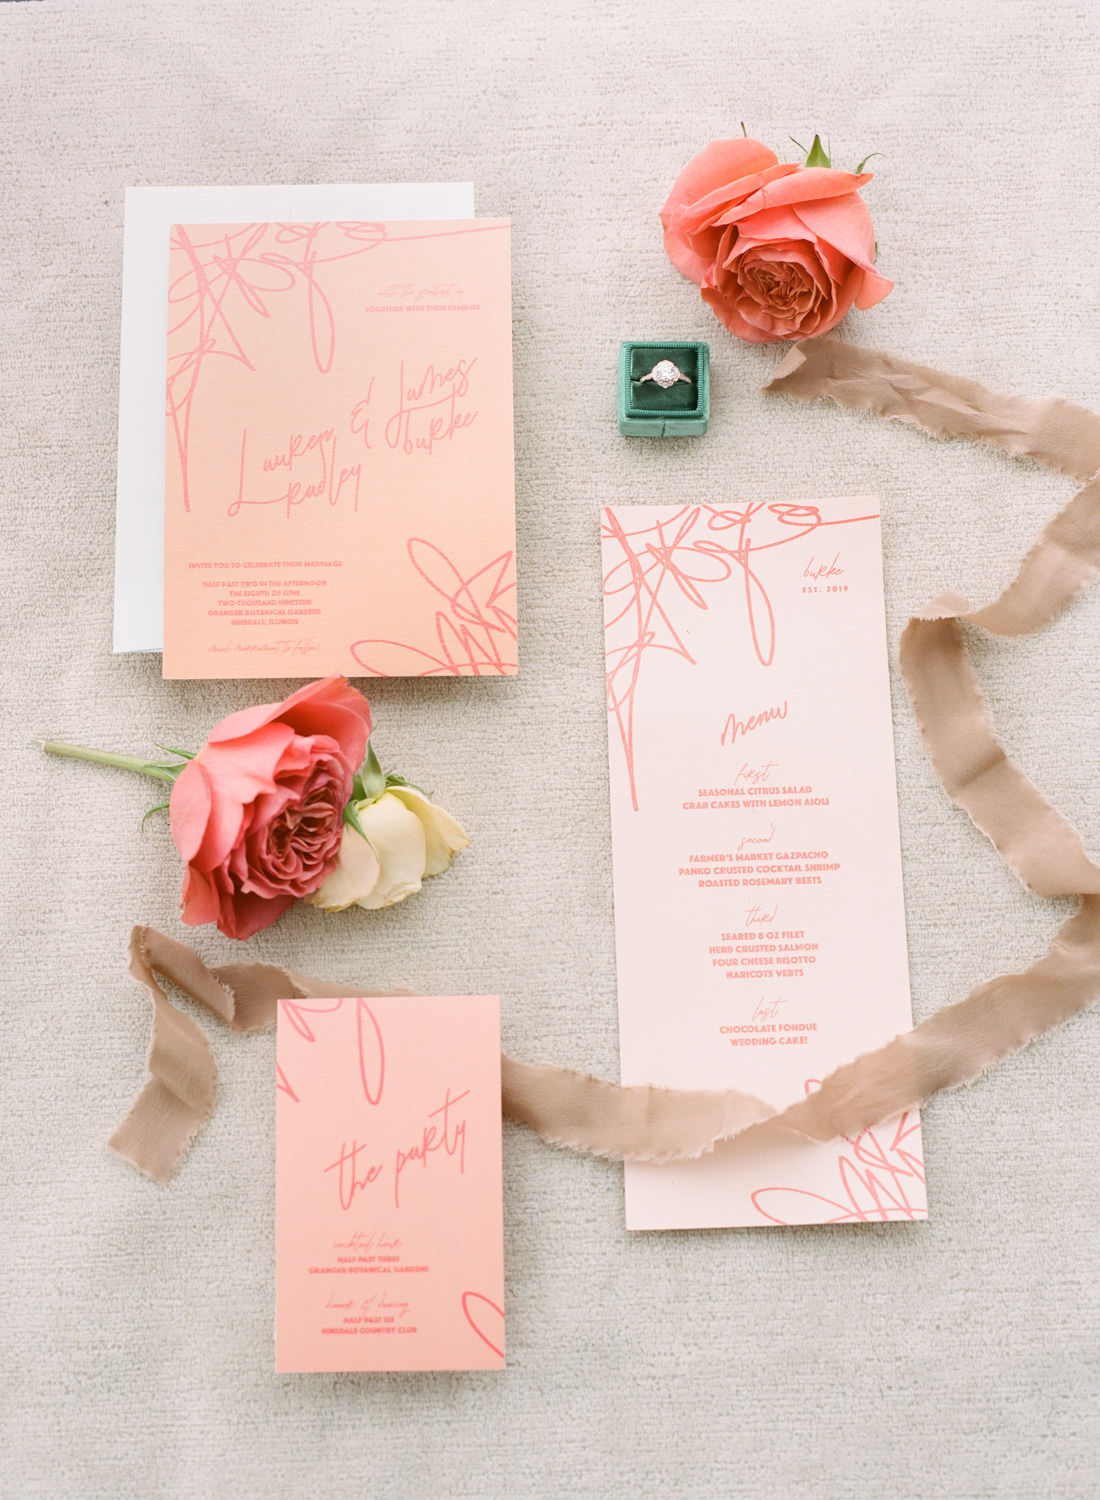 Coral Lo in London wedding invitation suite, Sturhahn Jewelers diamond ring in The Mrs. Box, St. Louis wedding photographer